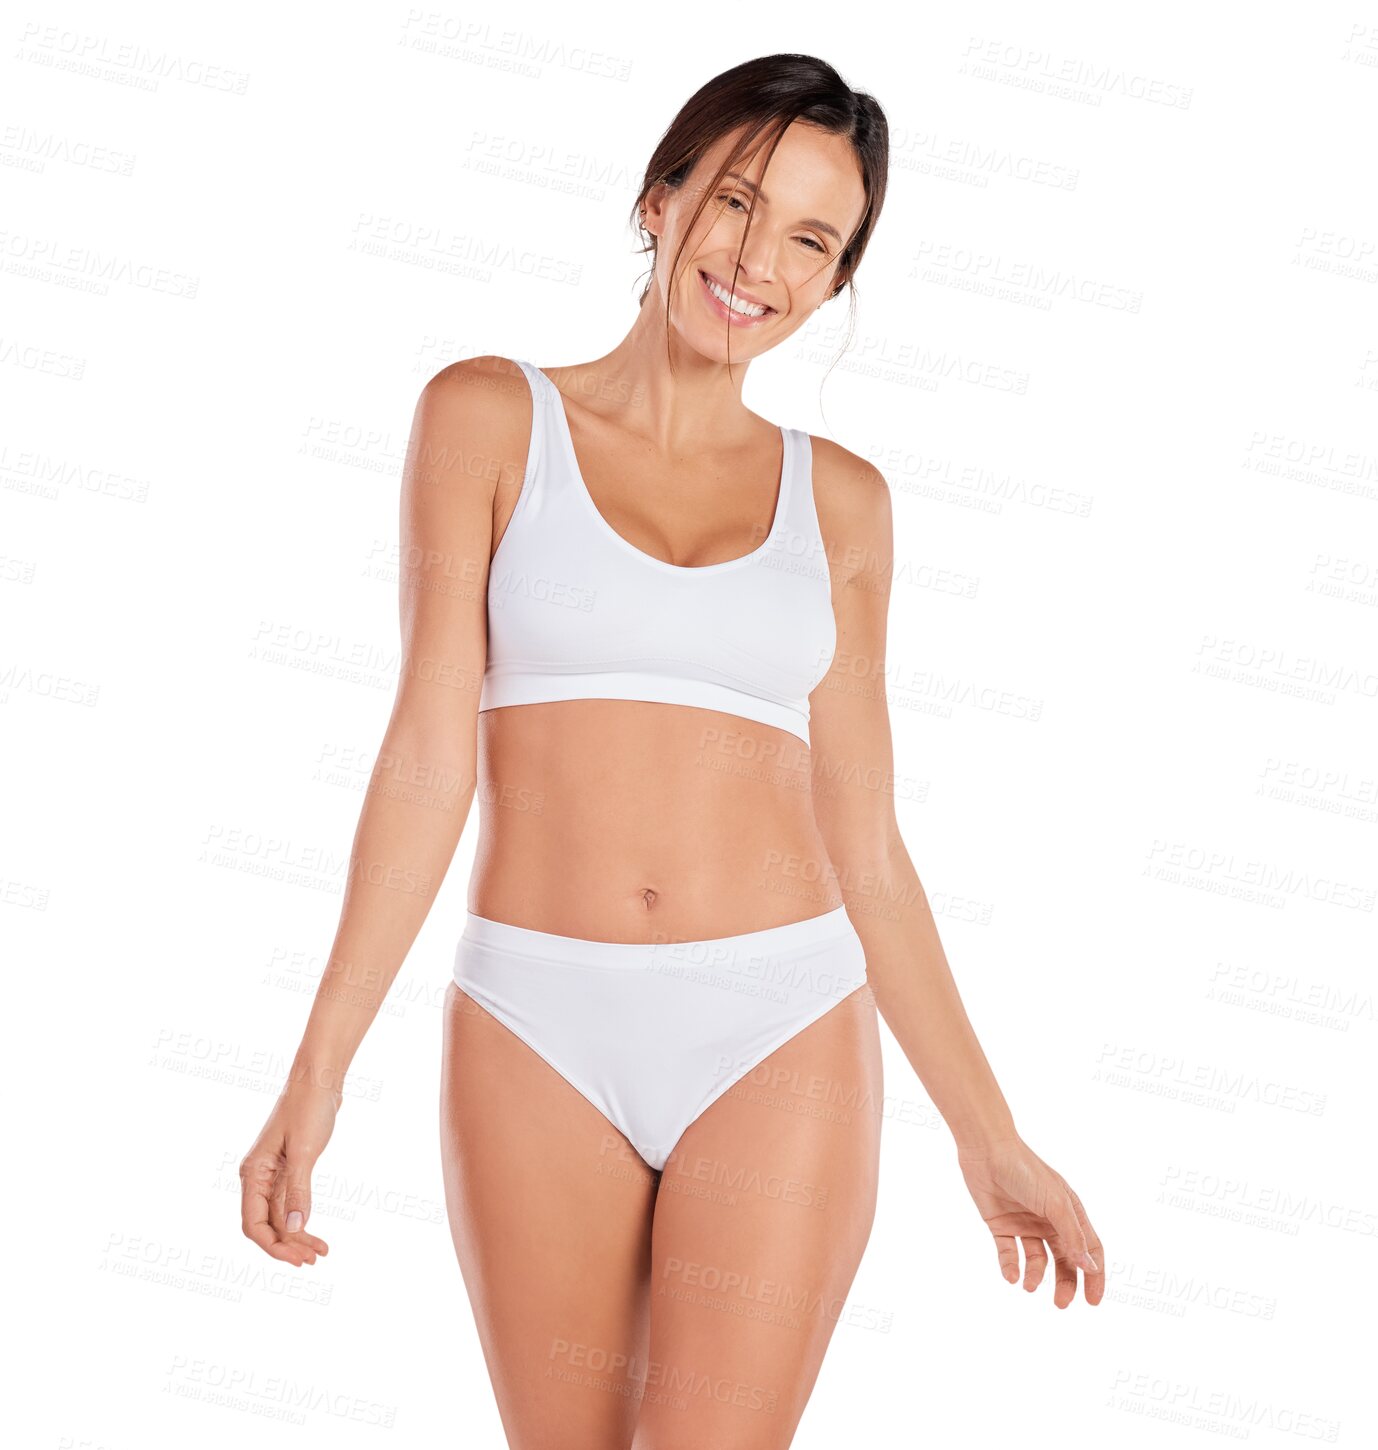 Buy stock photo Woman in underwear, happy in portrait and body with pride and beauty isolated on png transparent background. Cosmetics, healthy lifestyle and gut health, female model smile with skin and wellness